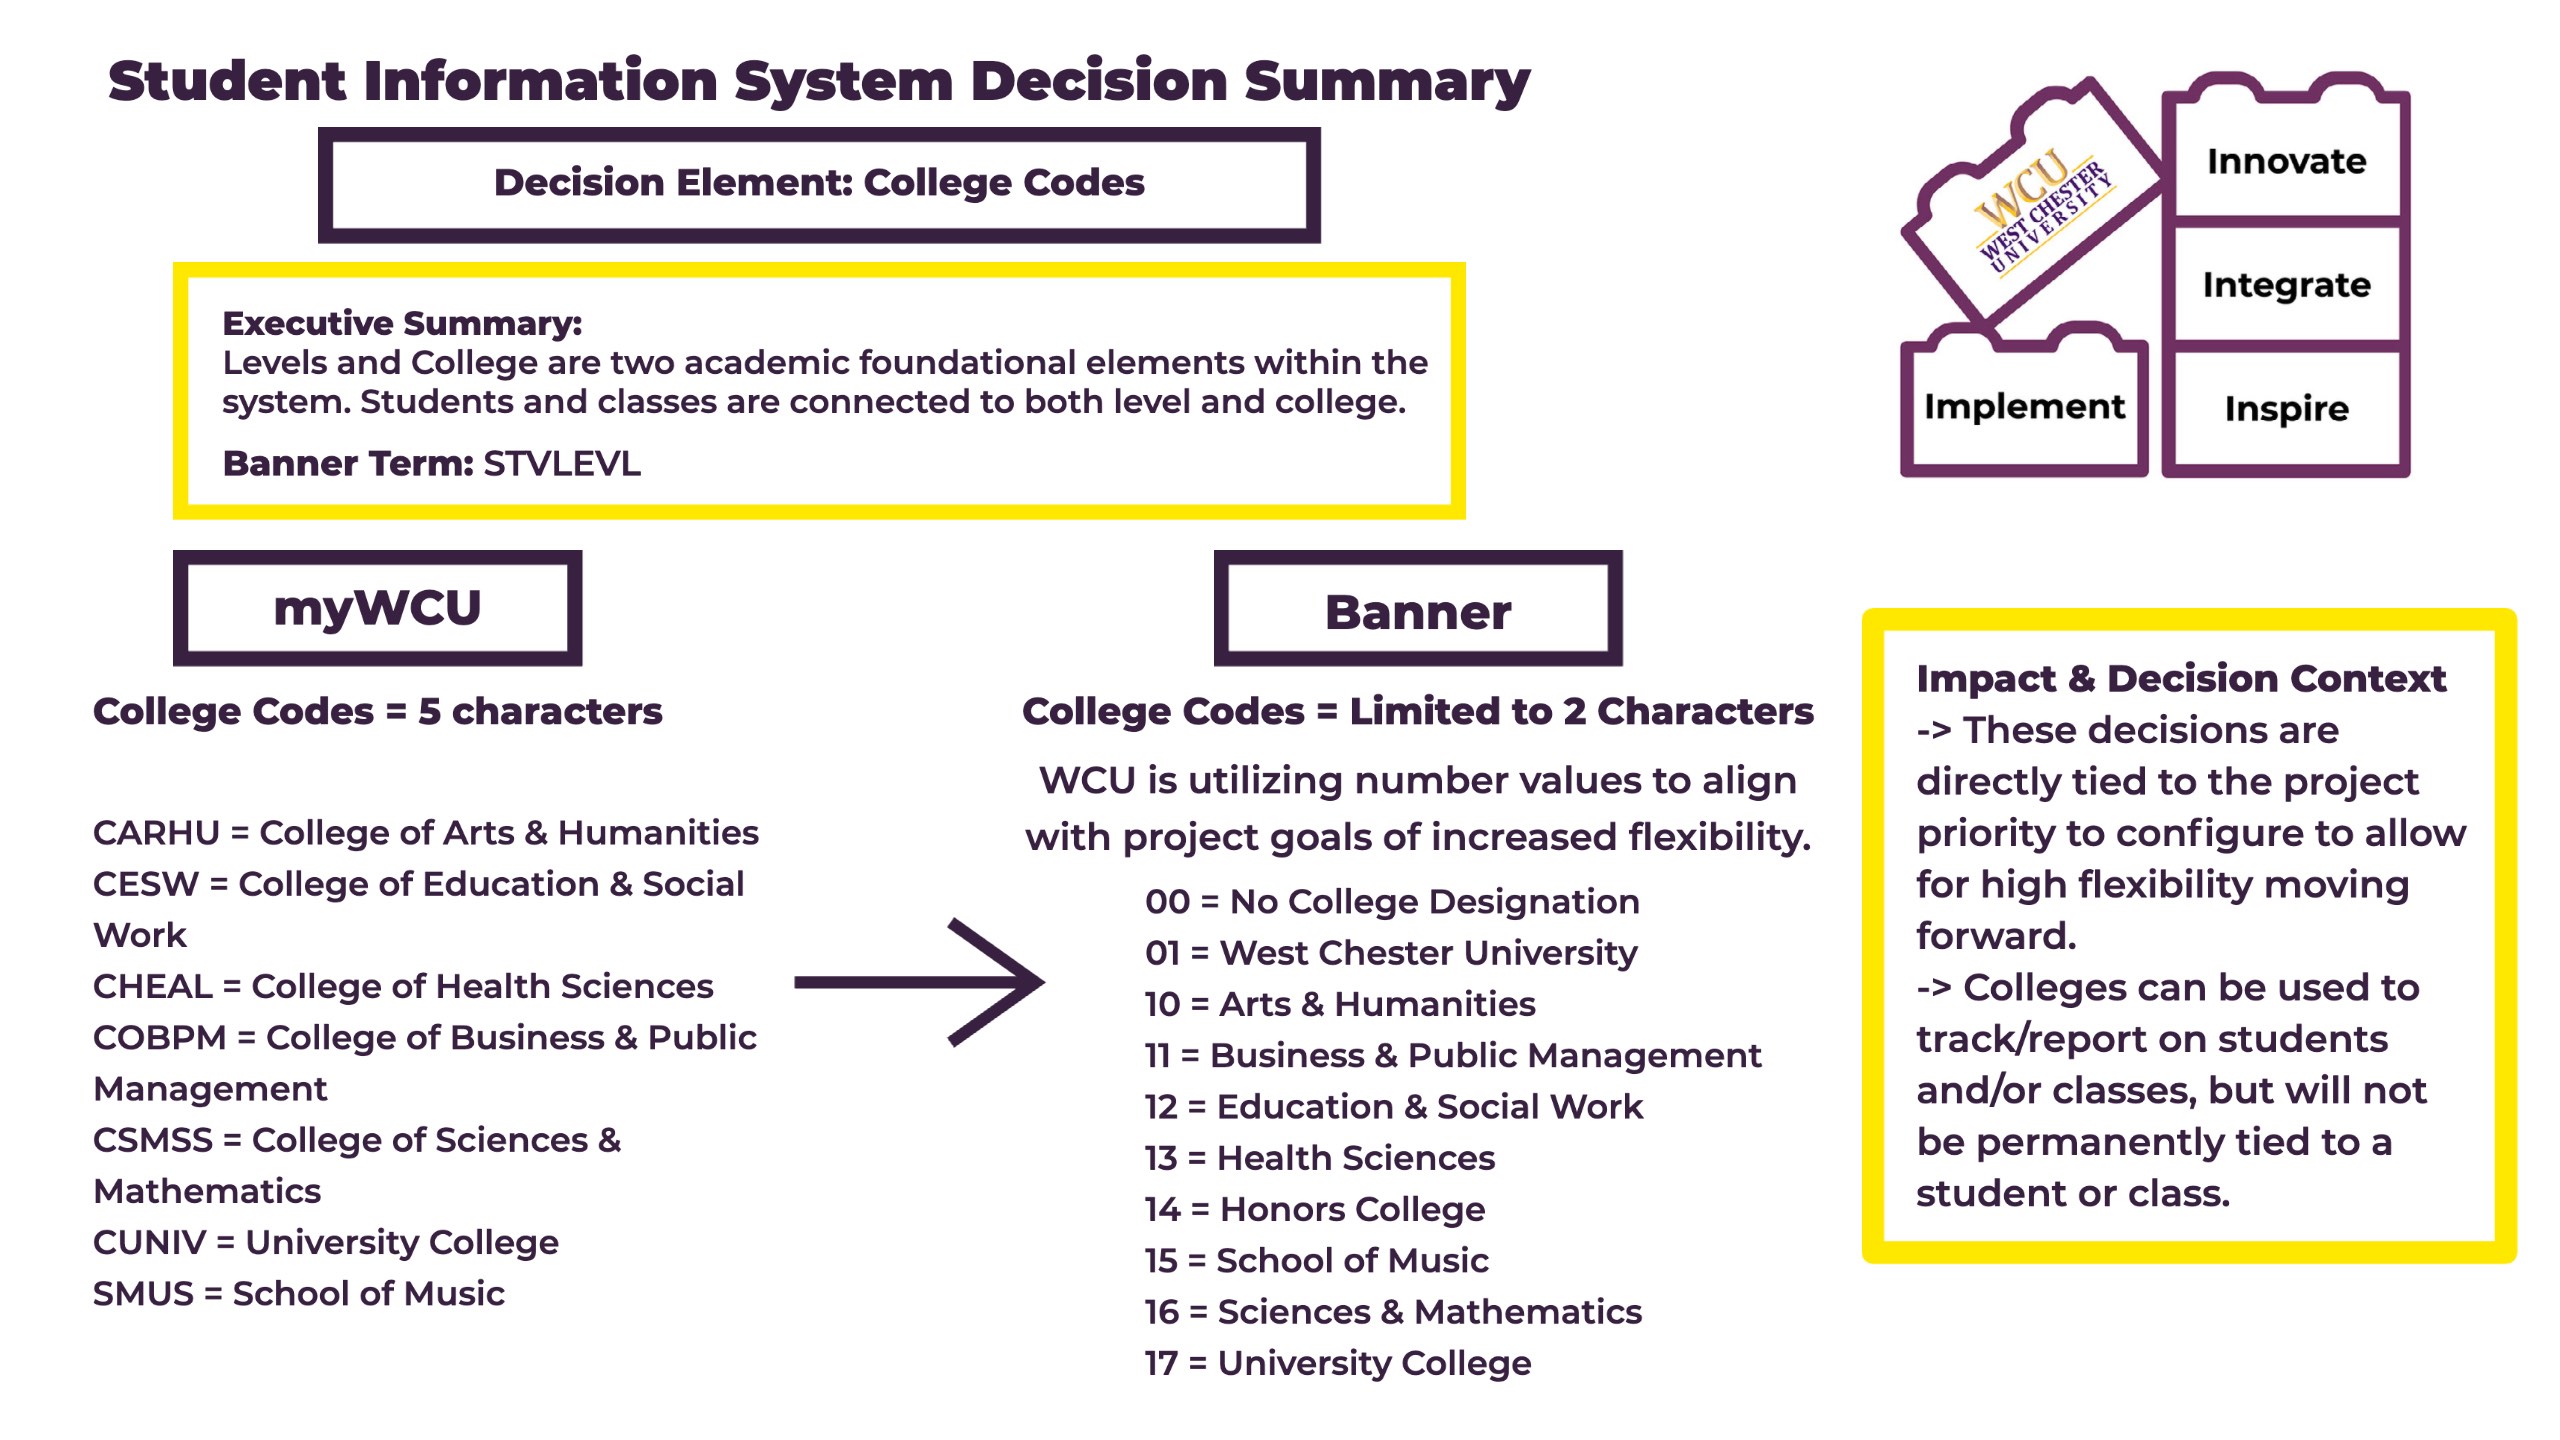   Student Information System Decision Summary Decision Element: College Codes WCU WEST CHESTER UNIVERSITY Innovate Executive Summary: Levels and College are two academic foundational elements within the system. Students and classes are connected to both level and college. Banner Term: STVLEVL Implement Integrate Inspire myWCU College Codes = 5 characters CARHU = College of Arts & Humanities CESW= College of Education & Social Work CHEAL = College of Health Sciences COBPM = College of Business & Public Management CSMSS = College of Sciences & Mathematics CUNIV = University College SMUS School of Music Banner College Codes = Limited to 2 Characters WCU is utilizing number values to align with project goals of increased flexibility. 00 = No College Designation 01 = West Chester University 10= Arts & Humanities 11 = Business & Public Management 12= Education & Social Work 13 = Health Sciences 14 = Honors College 15 School of Music = 16 = Sciences & Mathematics 17 = University College Impact & Decision Context -> These decisions are directly tied to the project priority to configure to allow for high flexibility moving forward. -> Colleges can be used to track/report on students and/or classes, but will not be permanently tied to a student or class. 